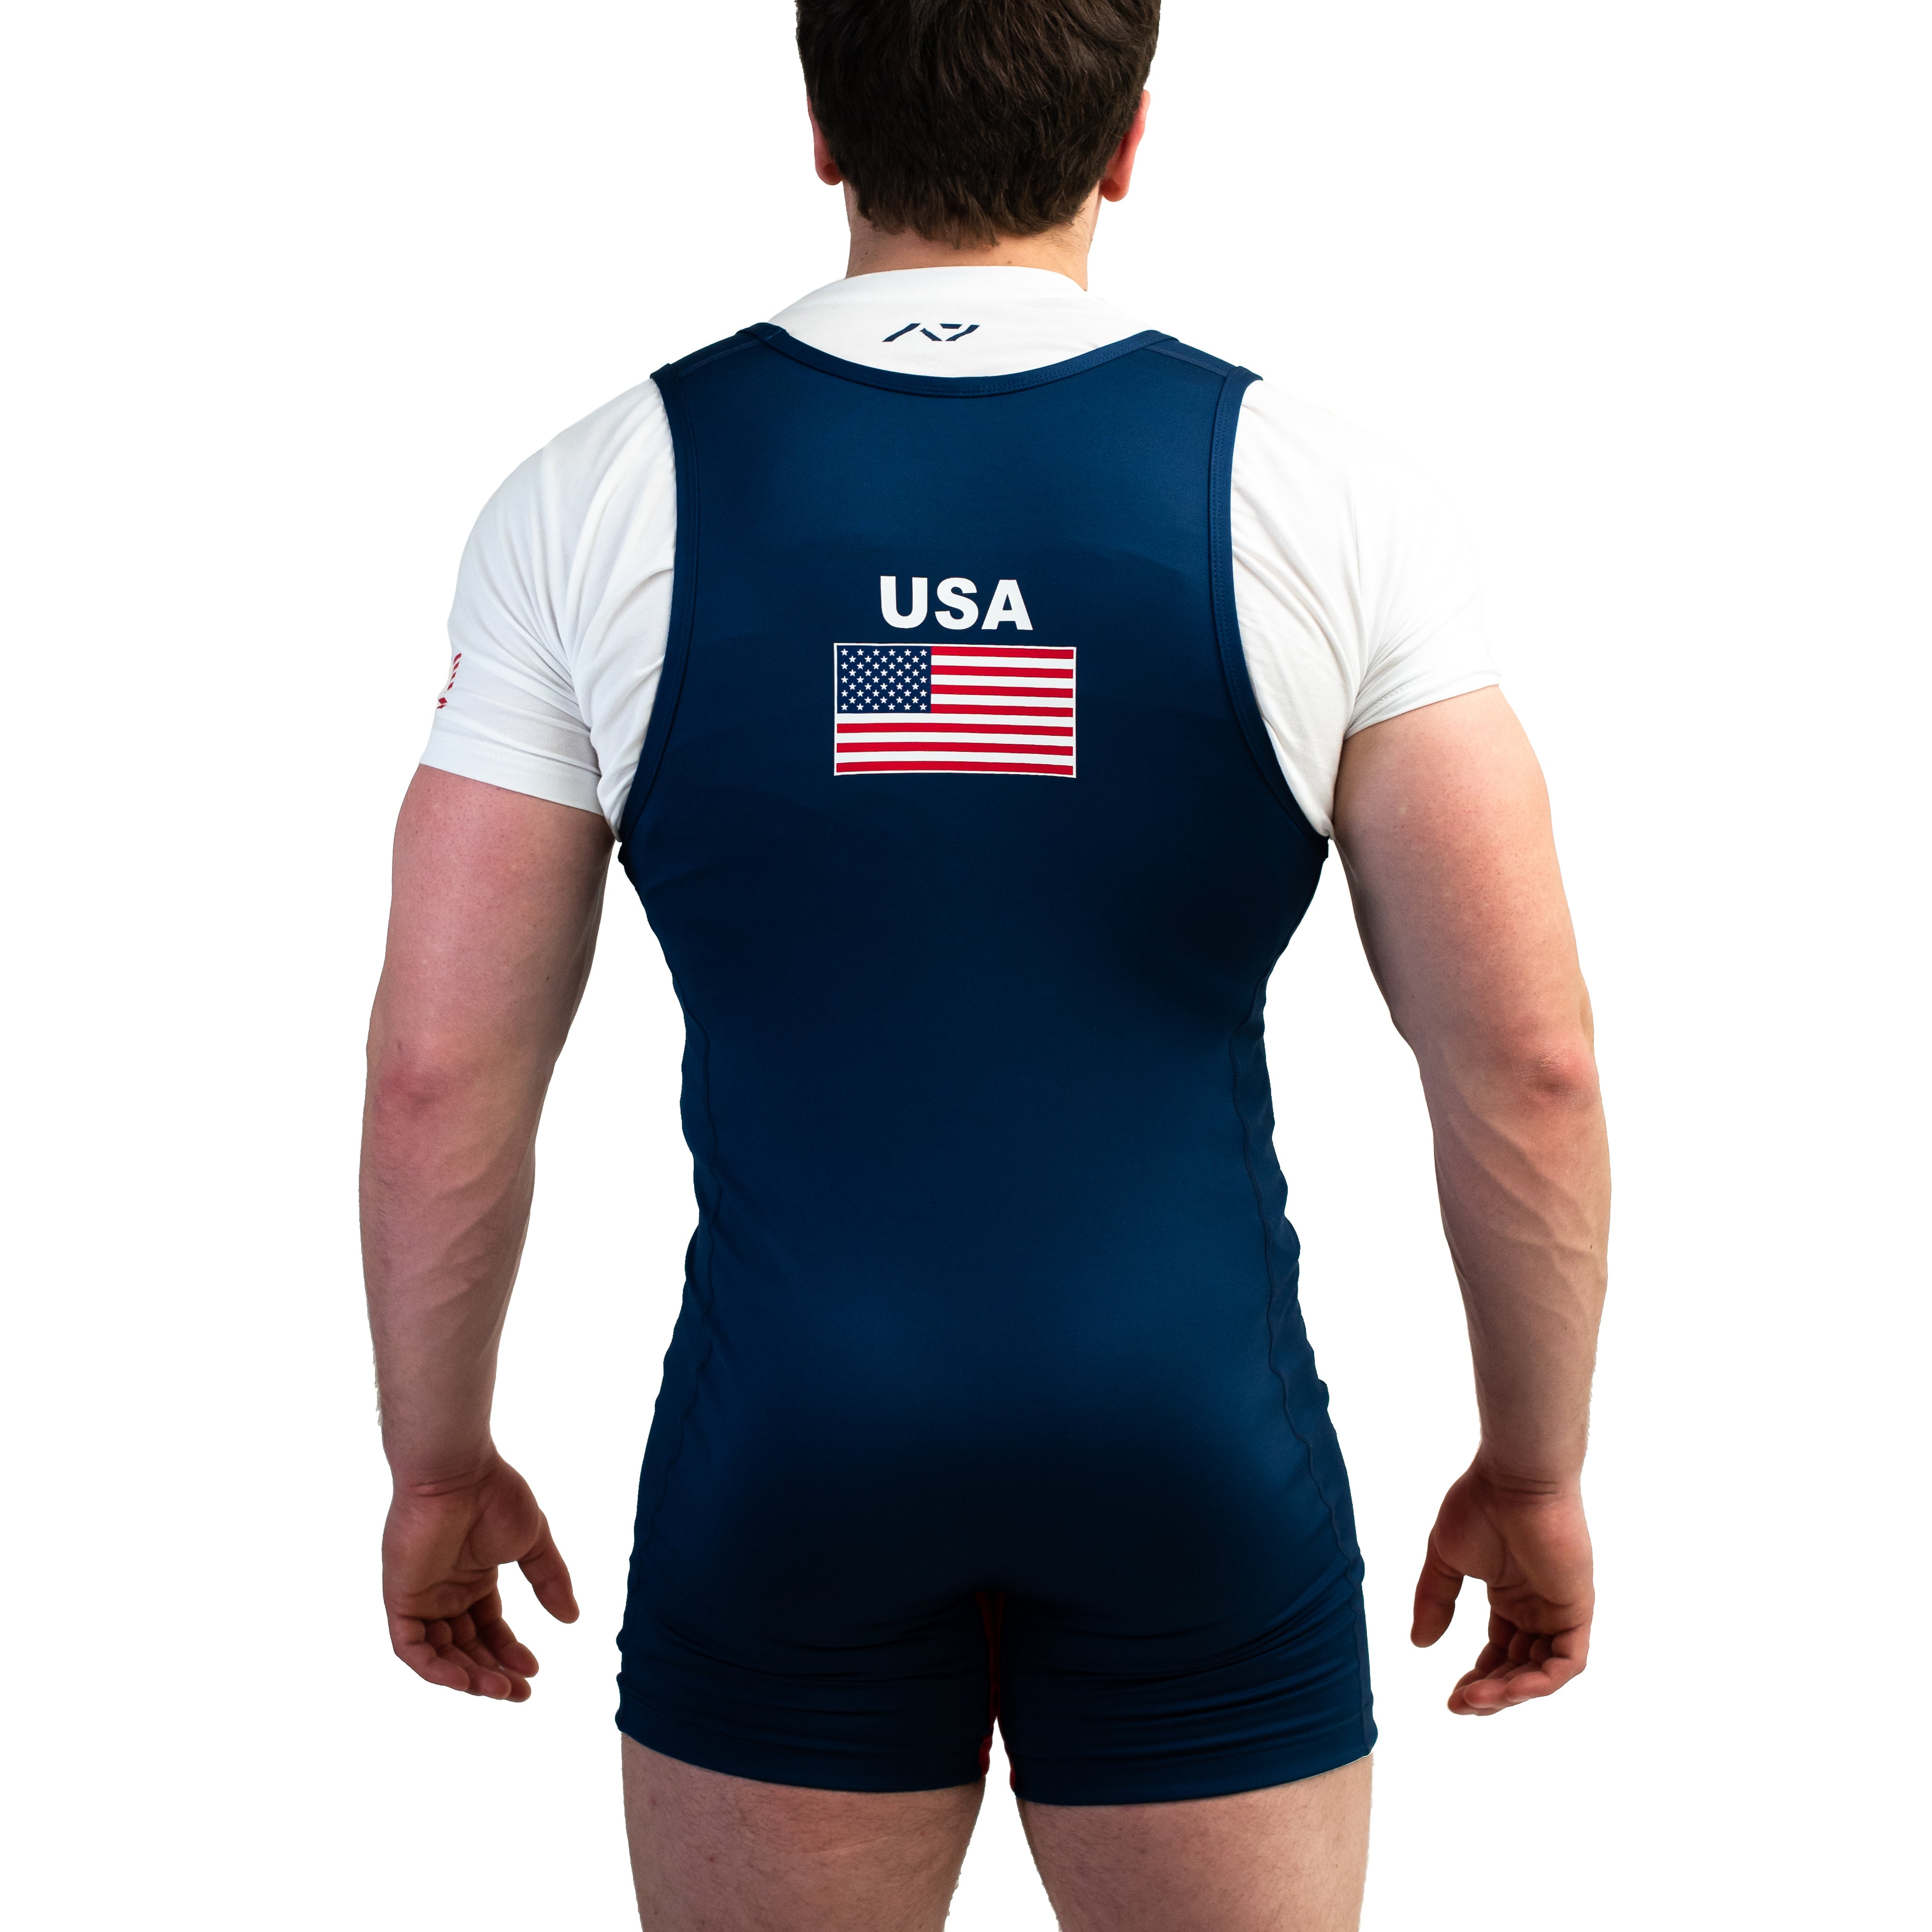 The SBD Powerlifting Singlet is constructed using the heaviest fabric  weight permitted by major powerlifting federations, providing maxim